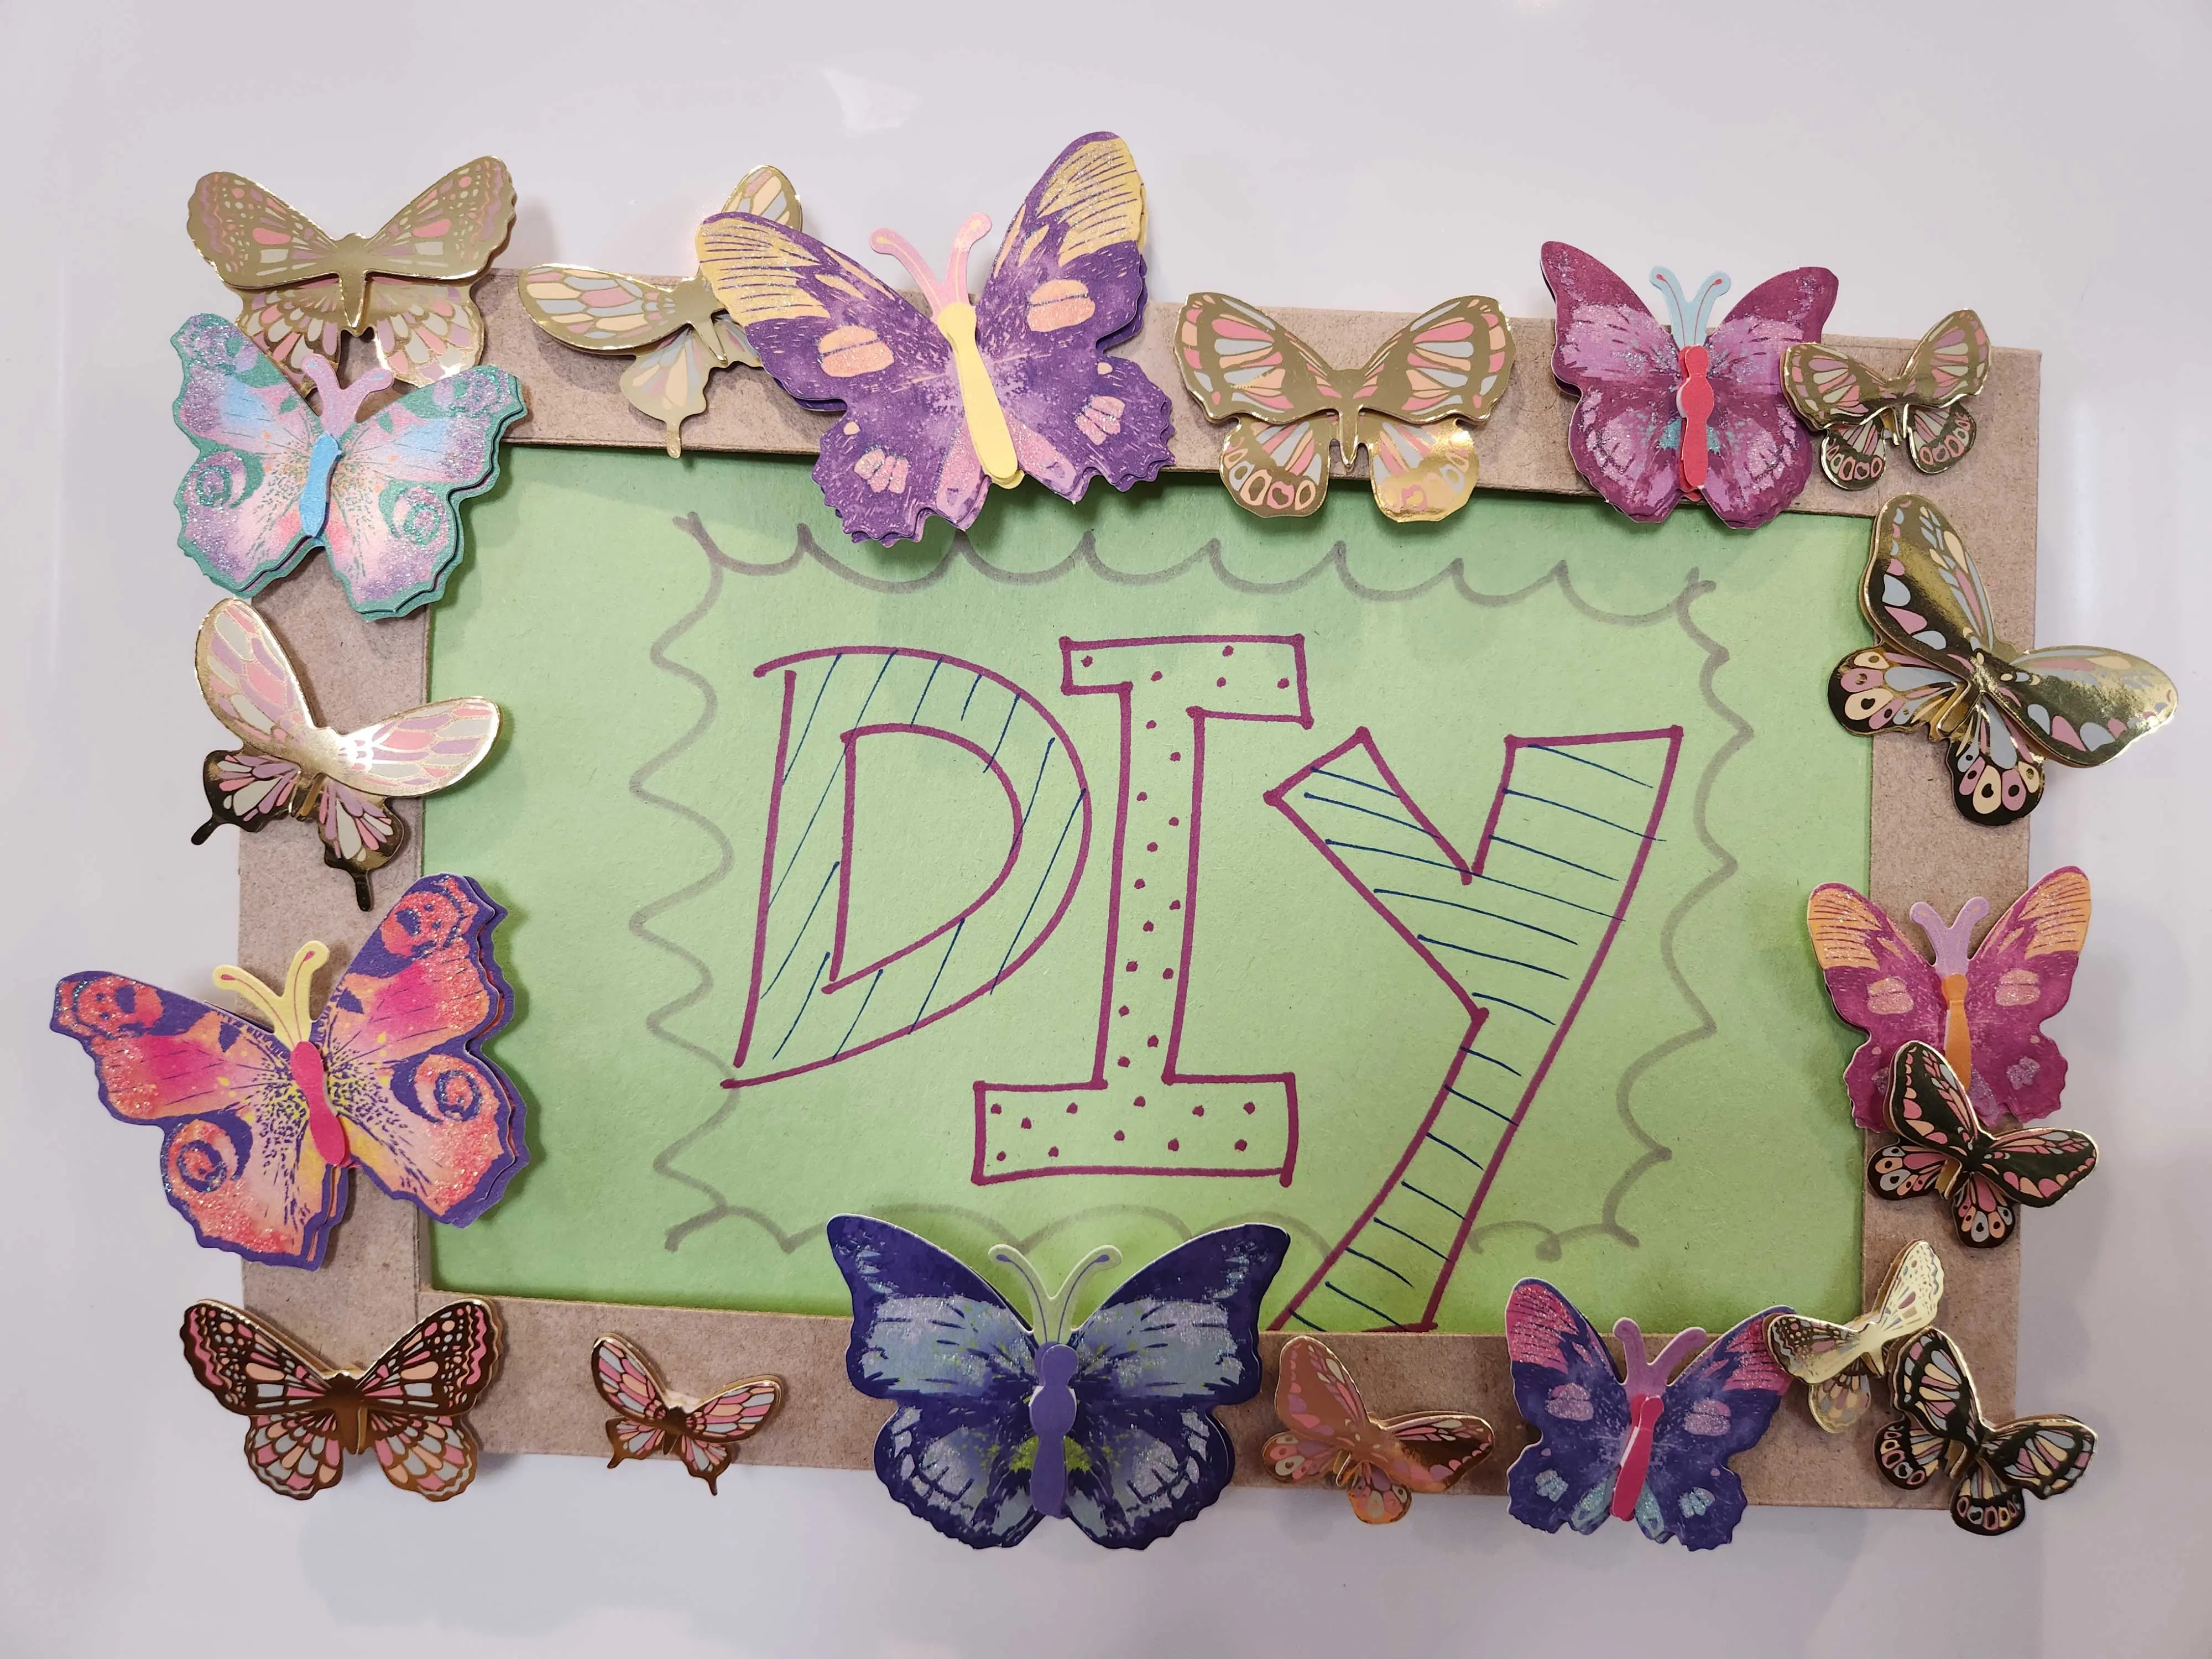 A piece of art that says DIY with butterflies on its edges.